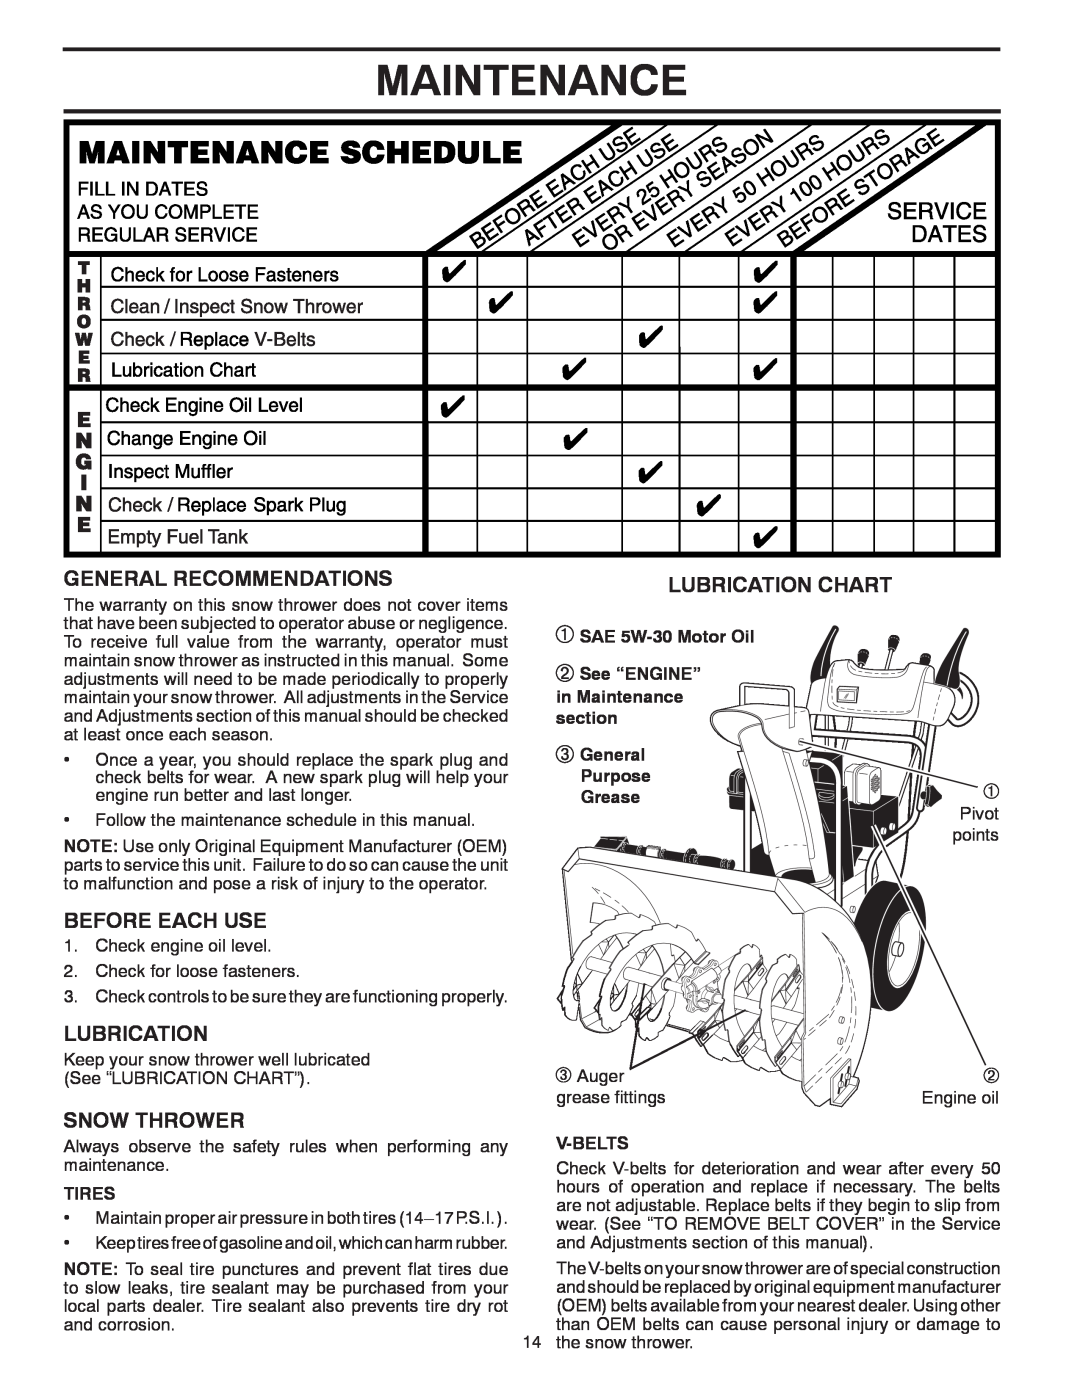 Poulan 437970 Maintenance, General Recommendations, Before Each Use, Snow Thrower, Lubrication Chart, Tires, V-Belts 